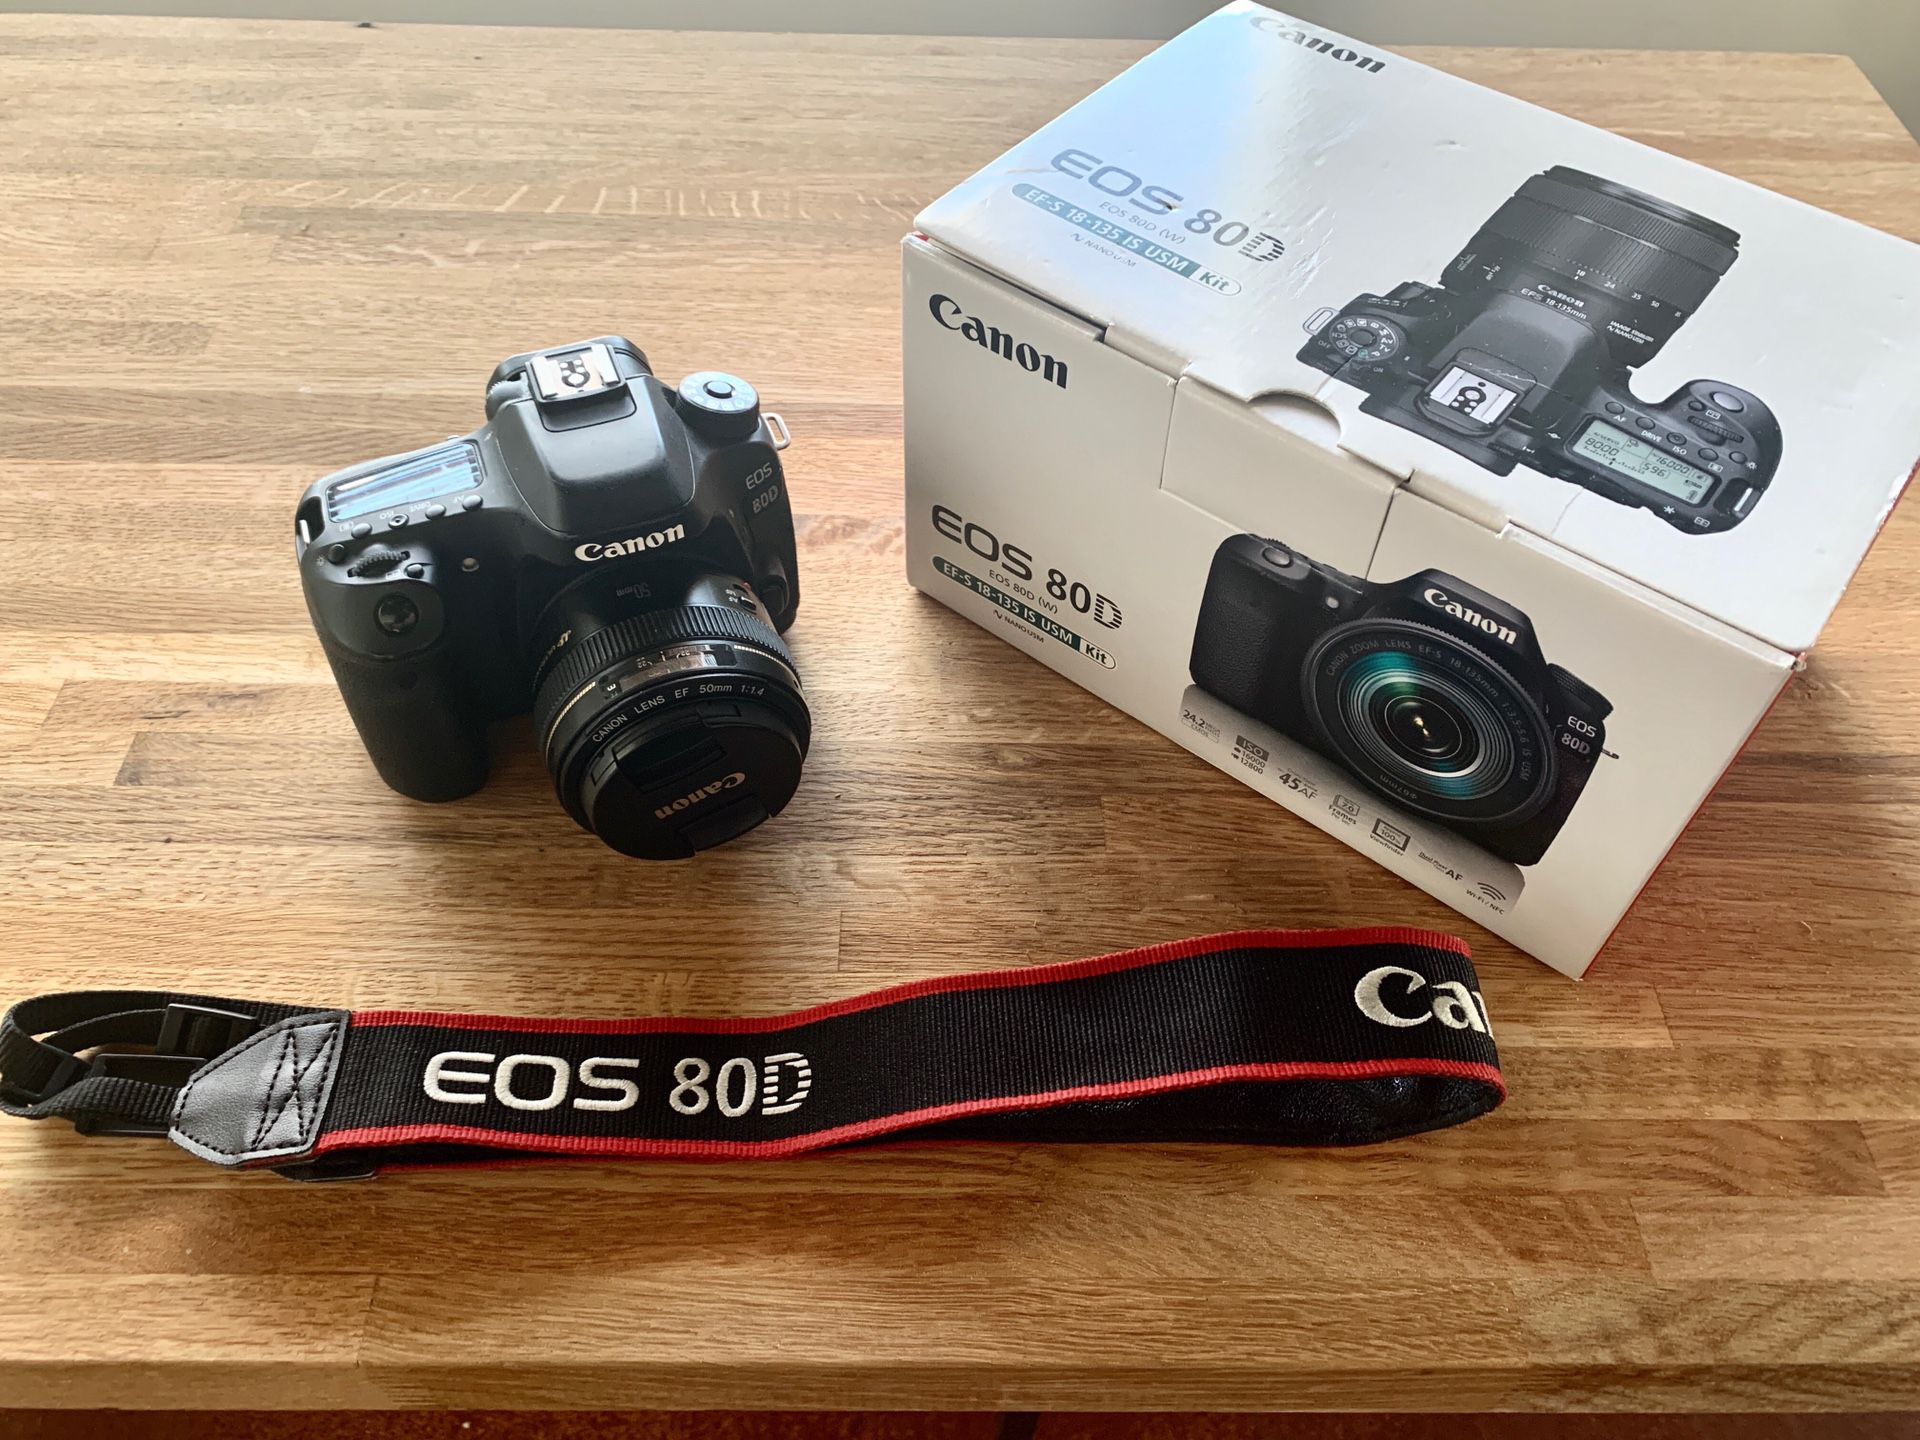 Canon 80d with 50mm 1.4 lens